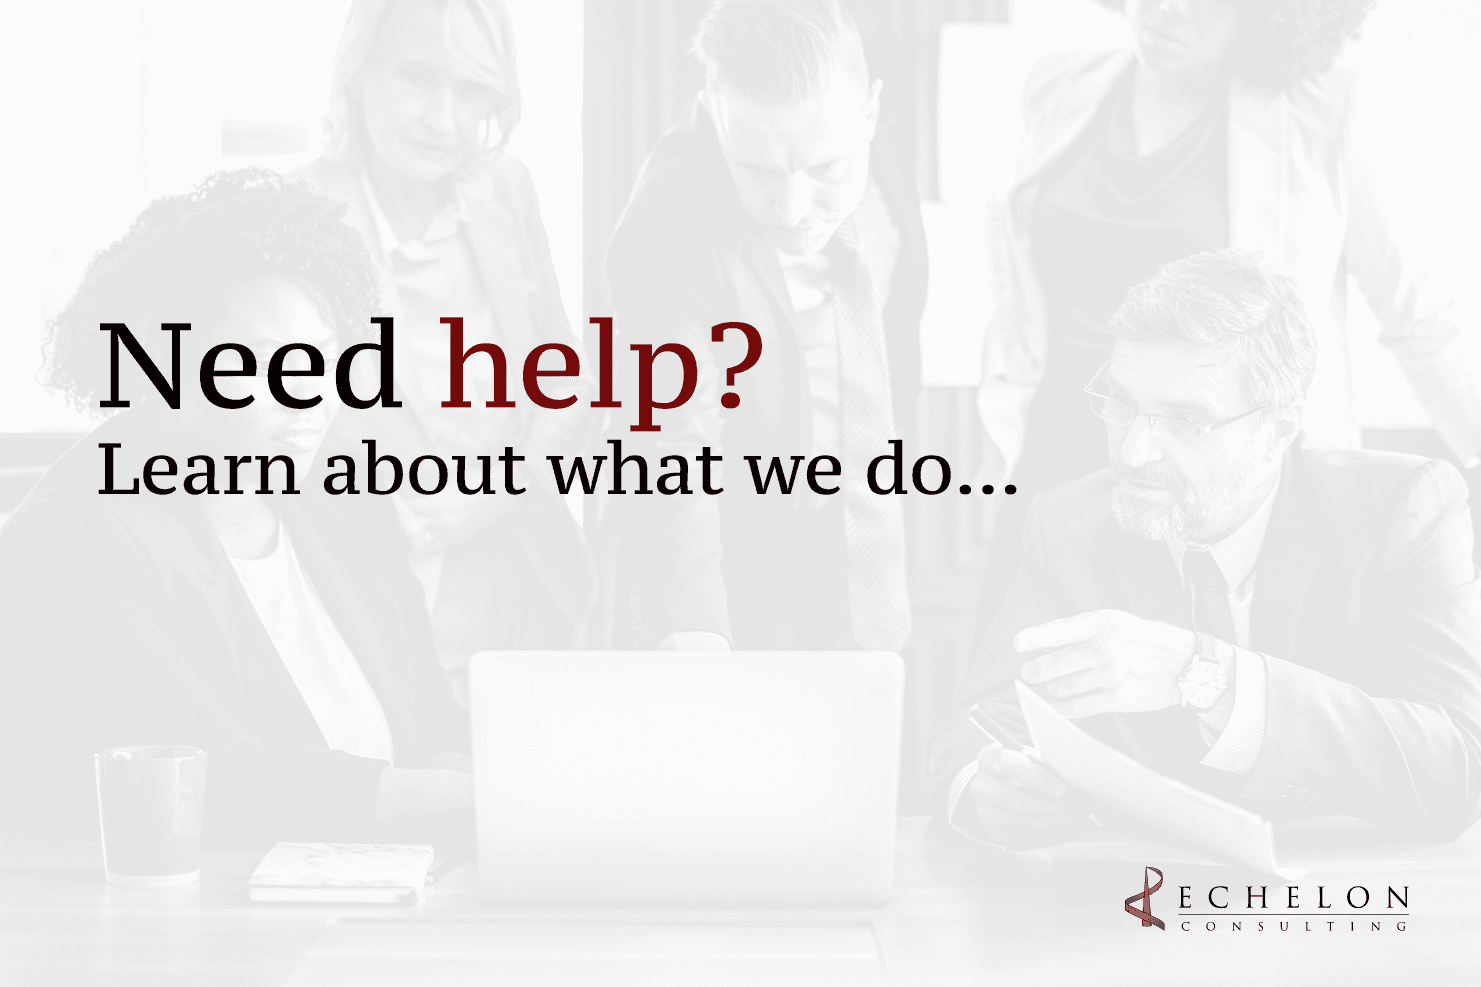 Need help? Learn about what we do...